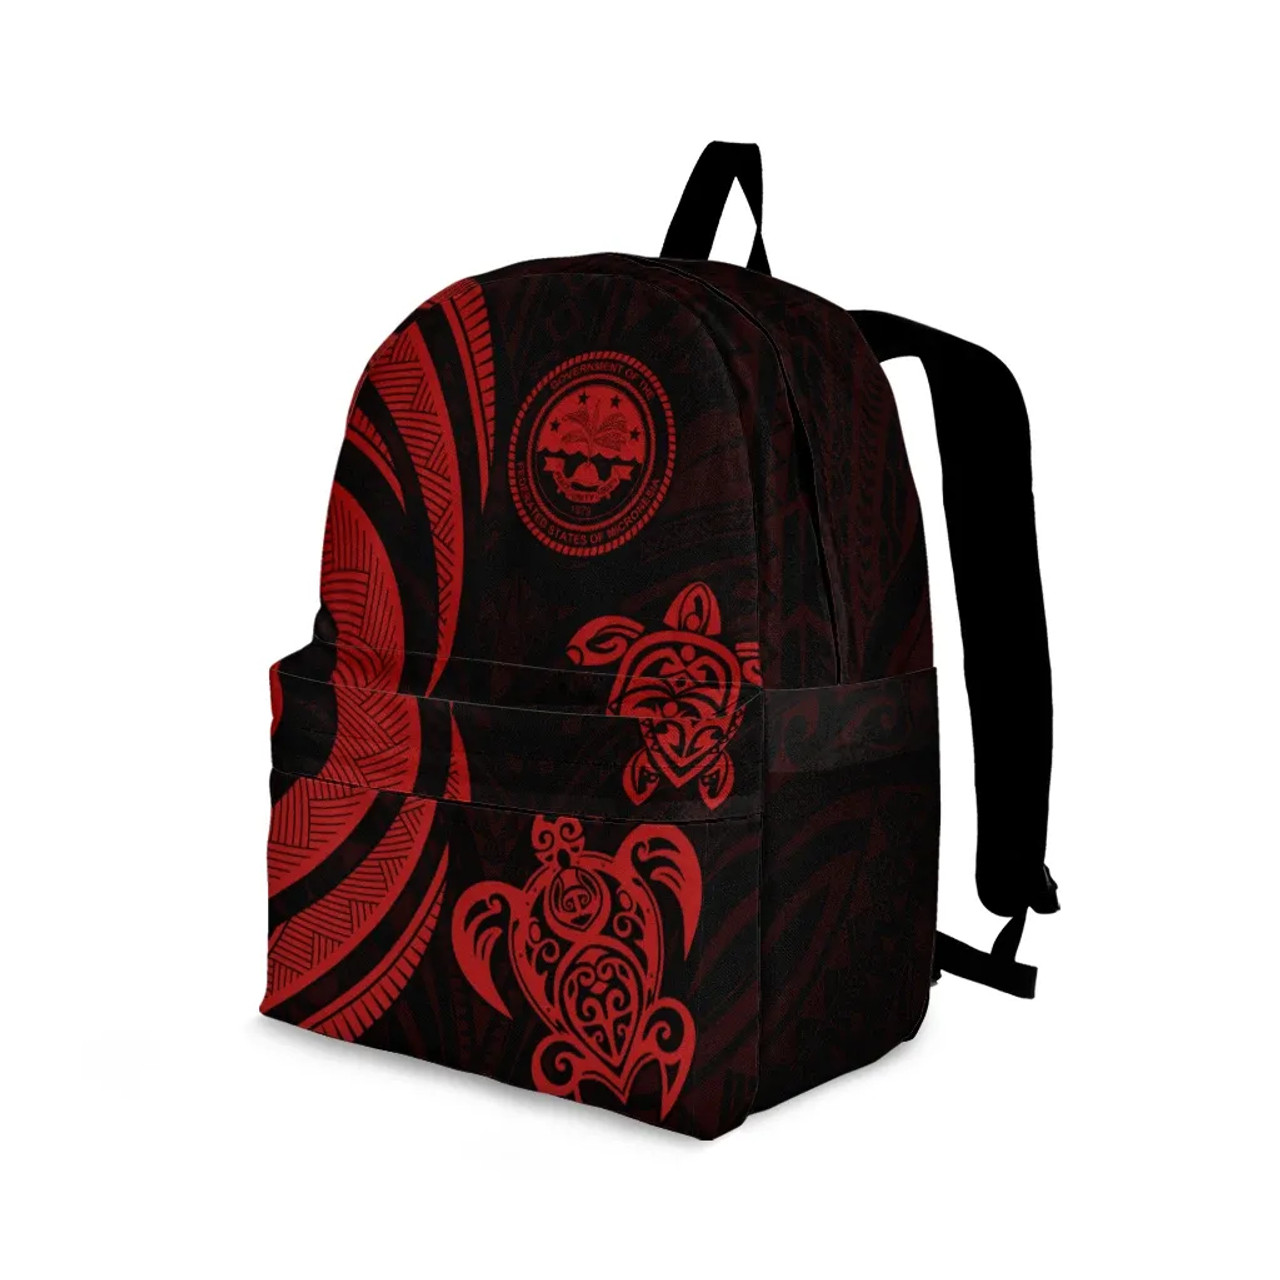 Federated States of Micronesia Backpack - Red Tentacle Turtle 2